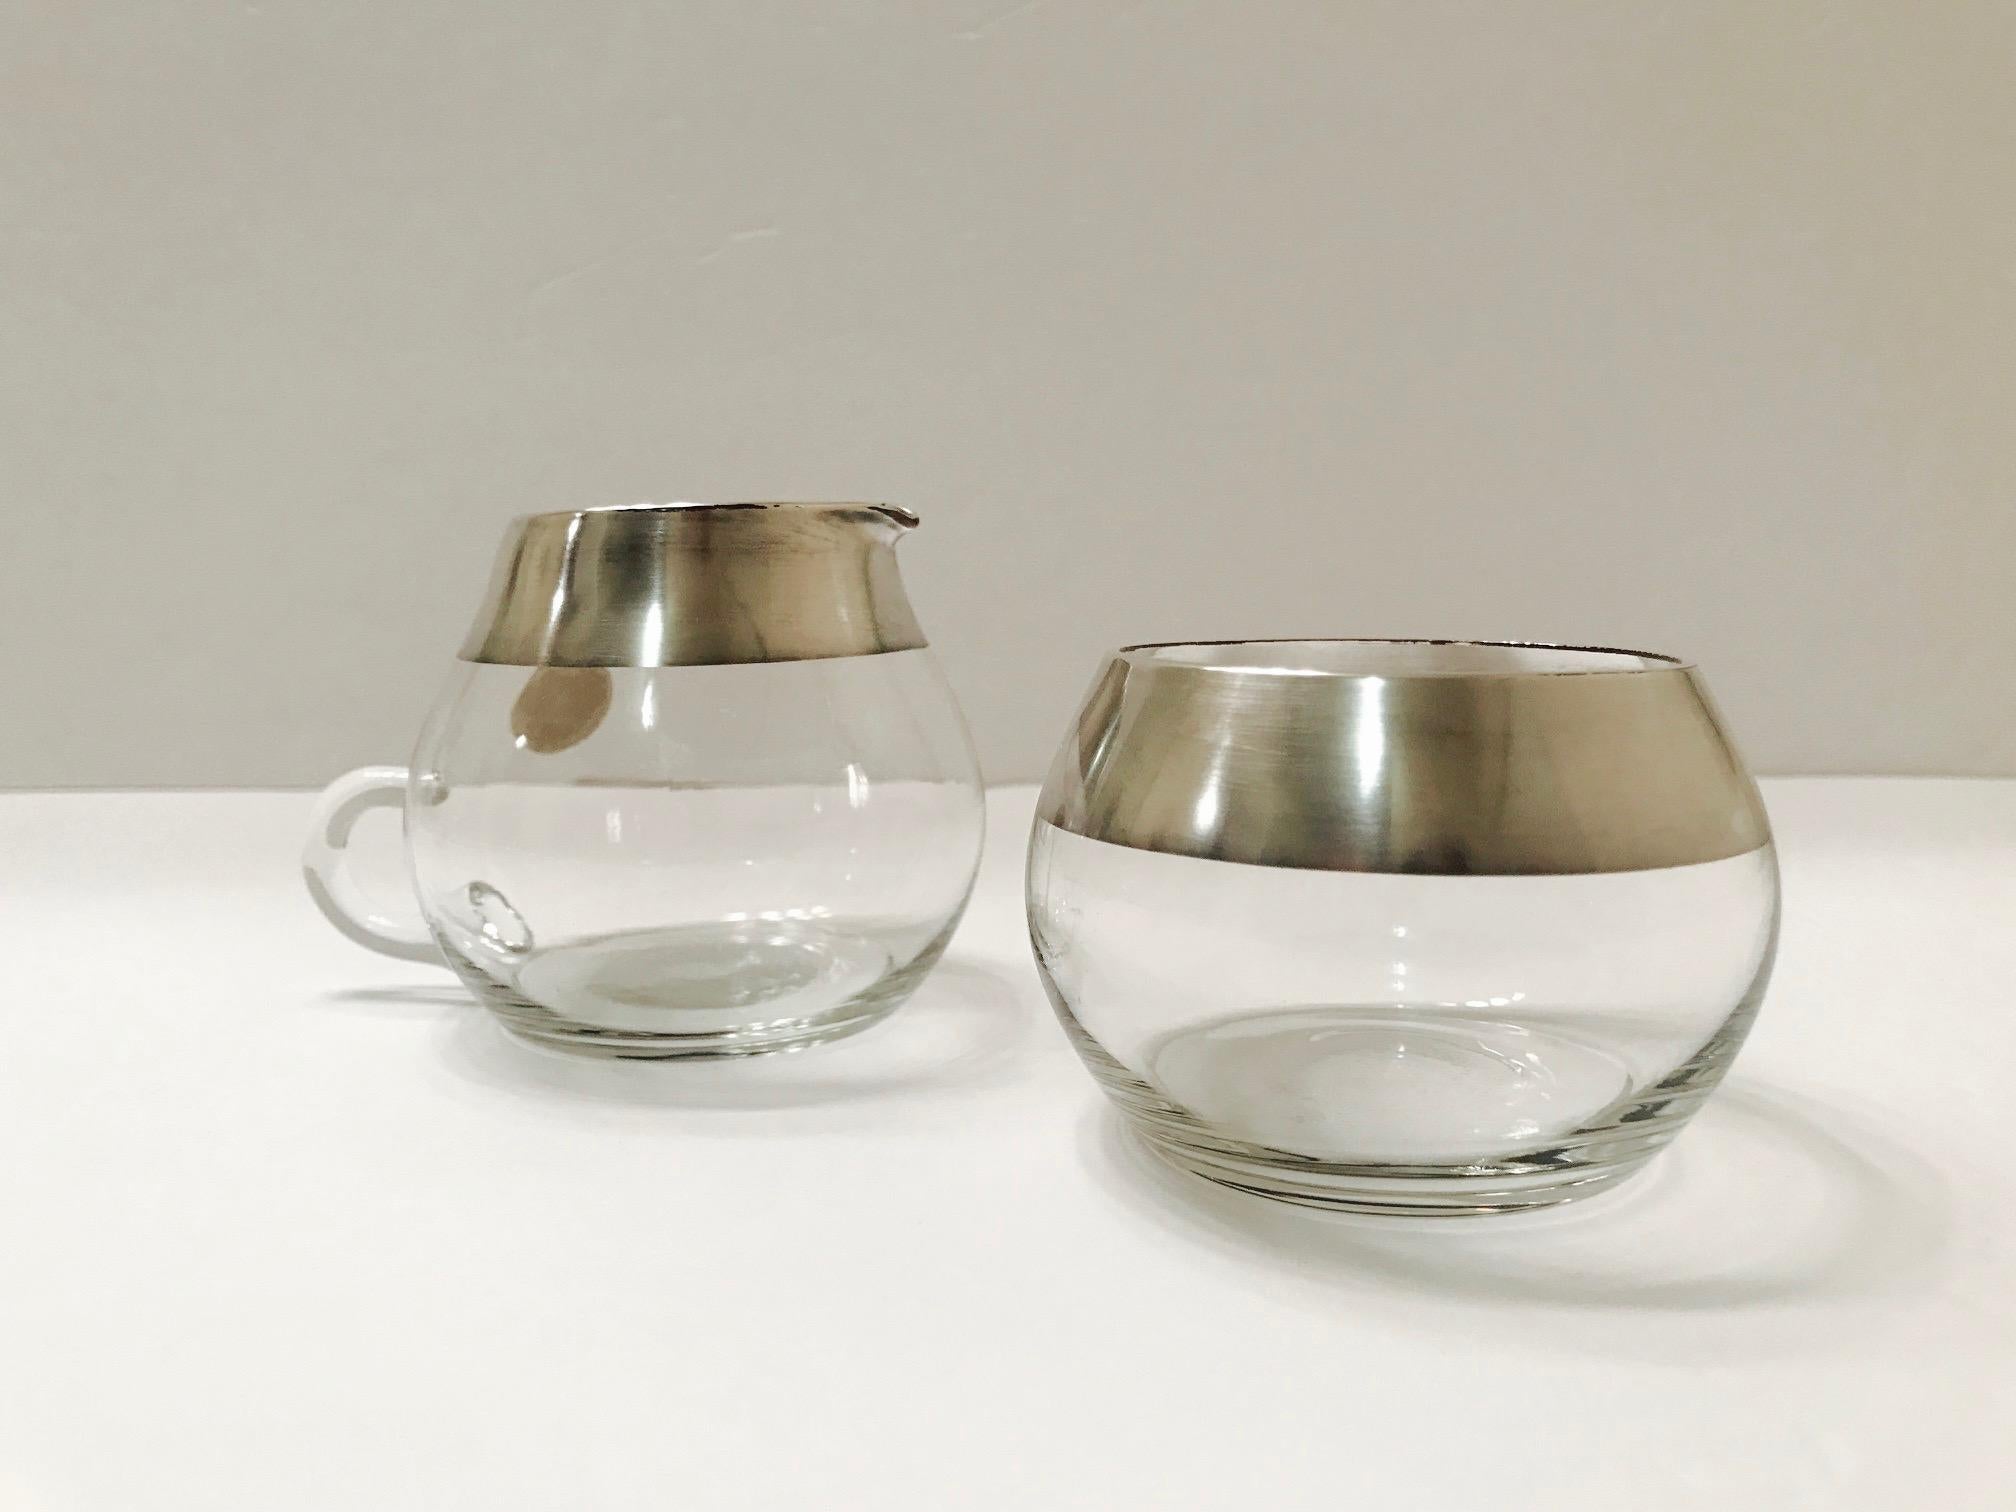 Blown Glass 1950s Sugar and Creamer Set with Sterling Silver Overlay by Dorothy Thorpe 